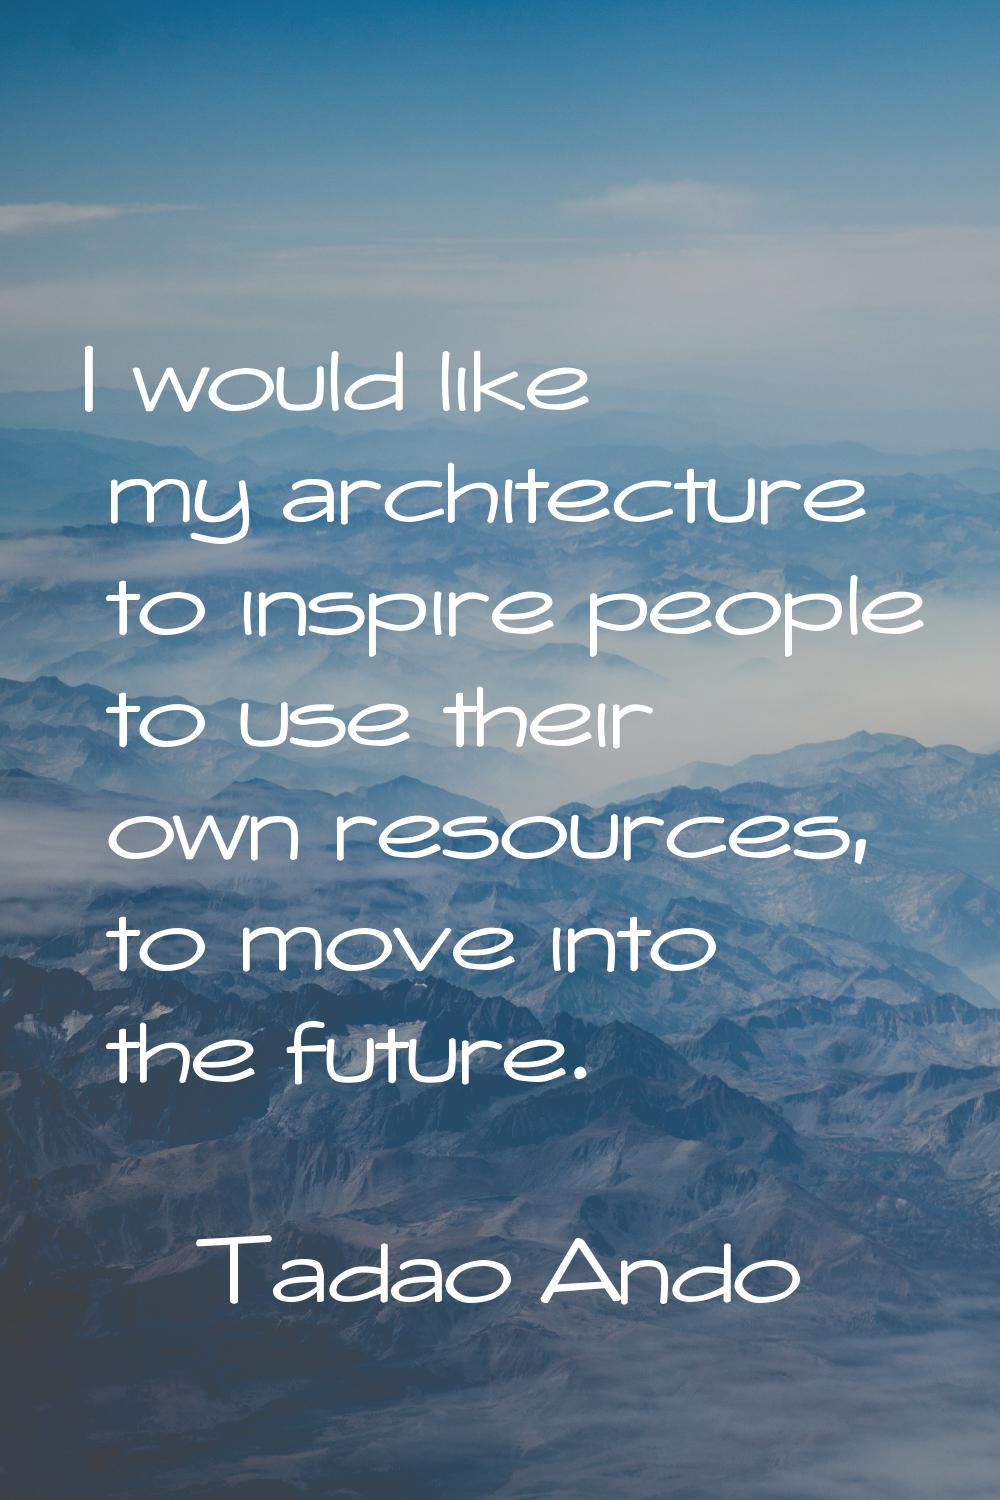 I would like my architecture to inspire people to use their own resources, to move into the future.